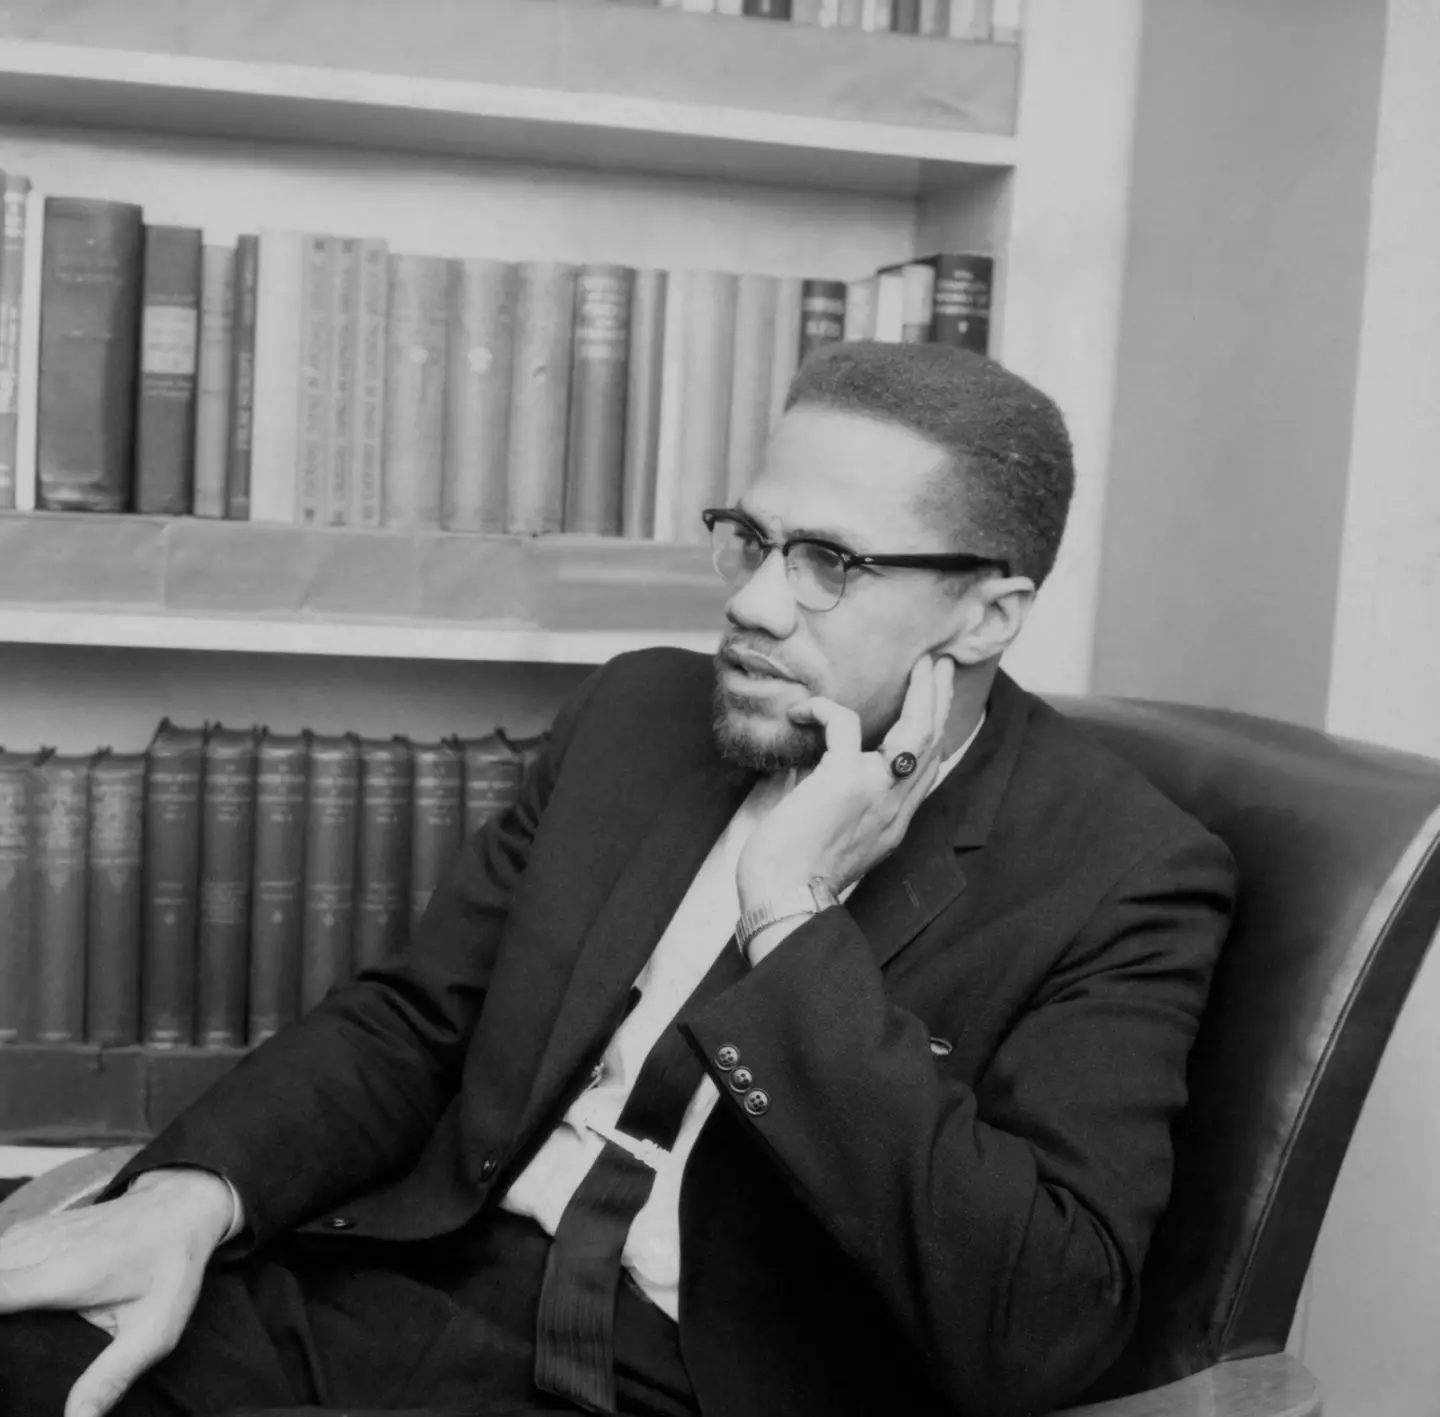 Malcolm X was assassinated in 1965.